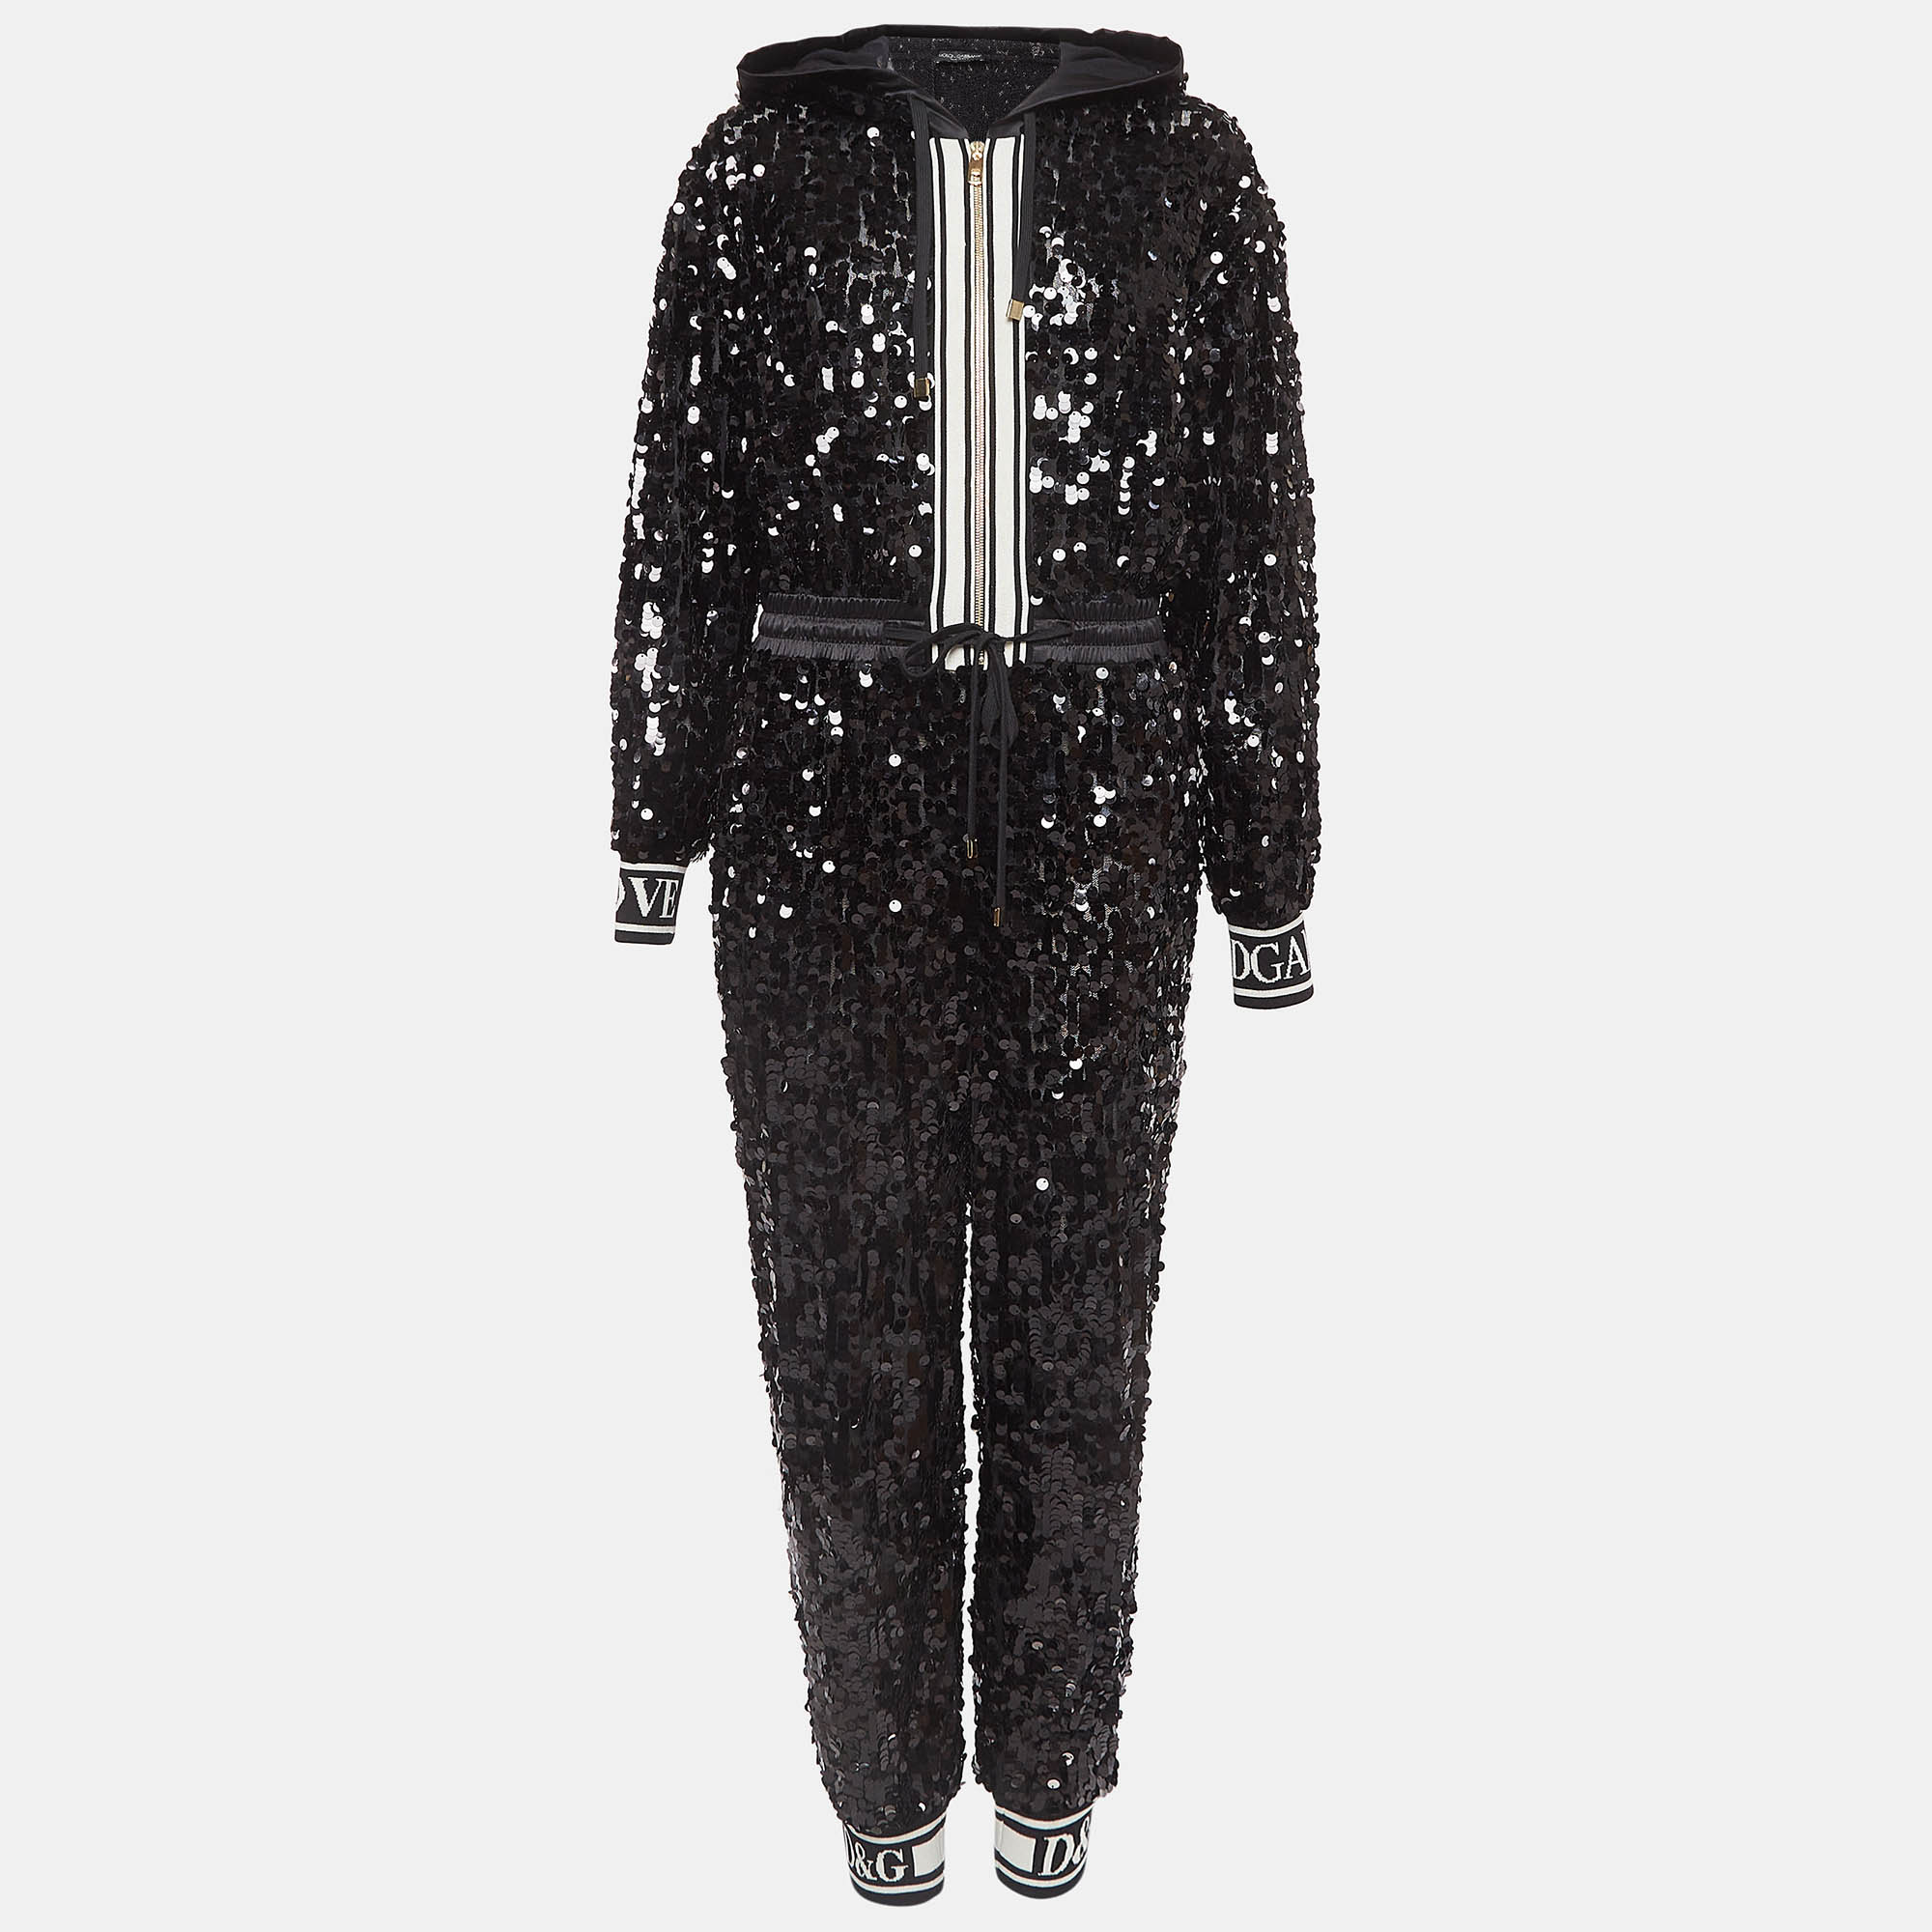 Dolce & gabbana black sequin and mesh hooded jumpsuit s